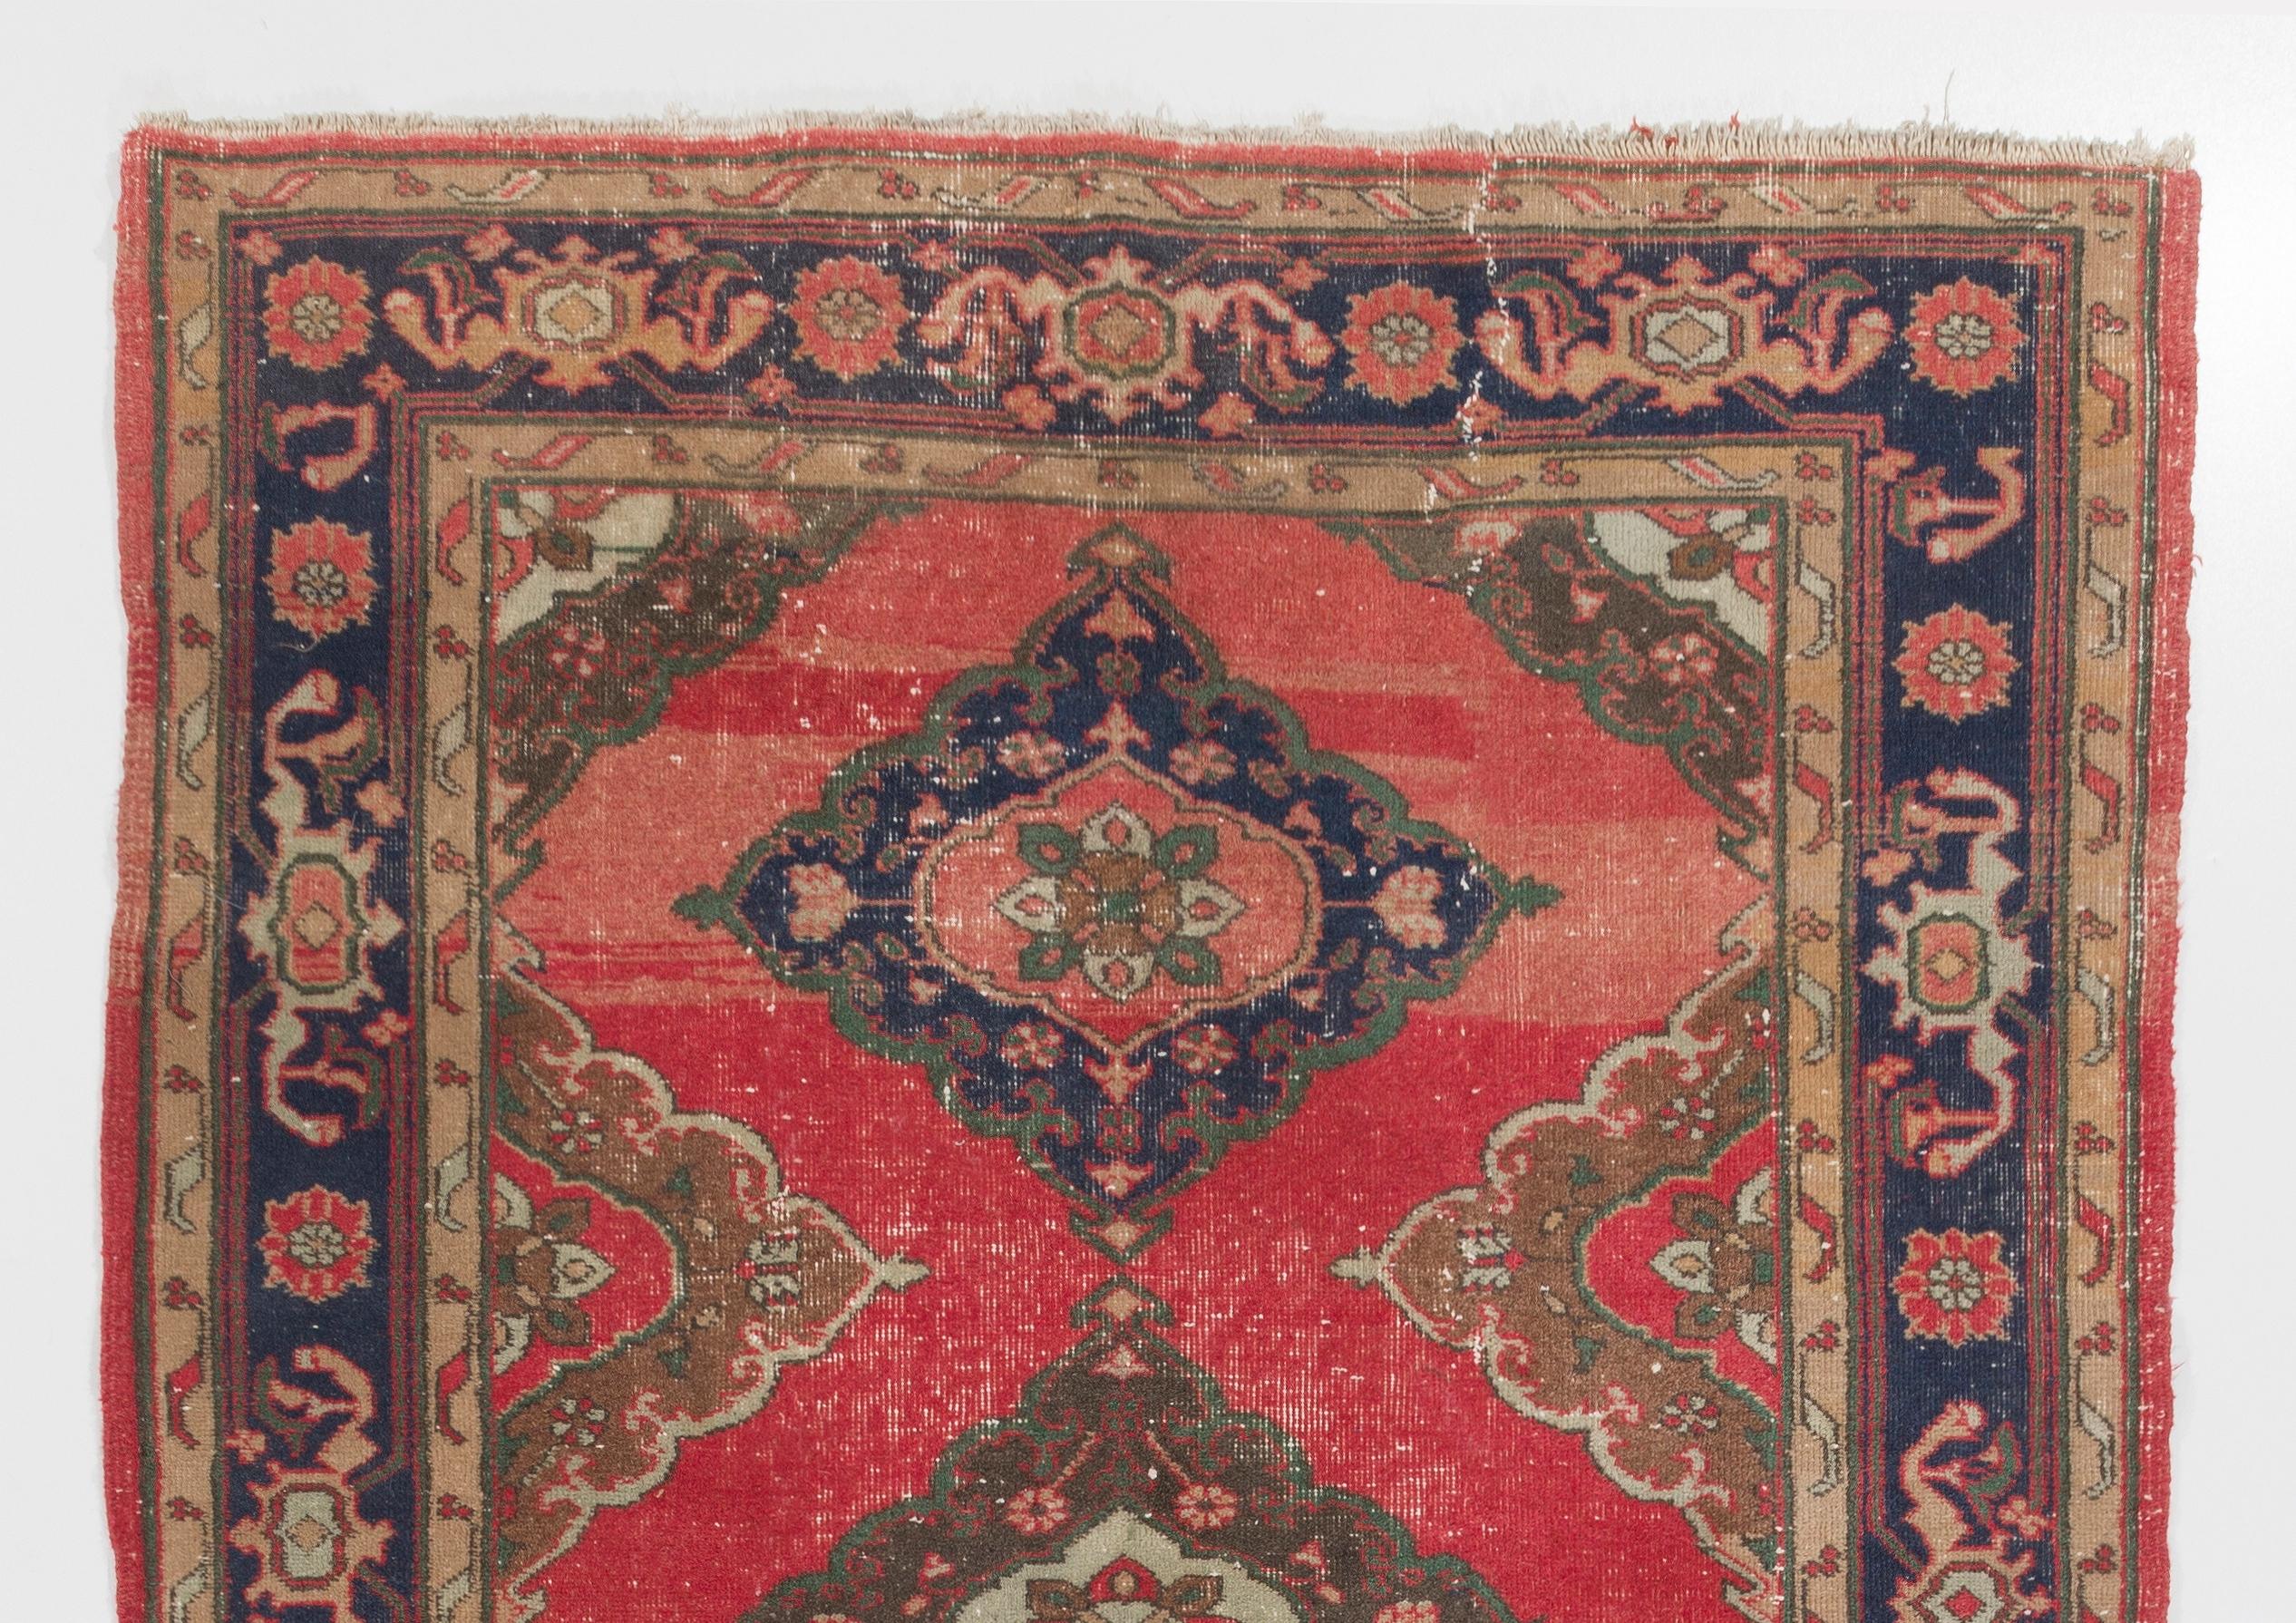 A vintage runner rug from Turkey. It is made of medium wool pile on wool foundation and features multiple medallion design. It has been washed professionally, the rug is sturdy and can be used in both residential or commercial interiors. 
Size: 5 x